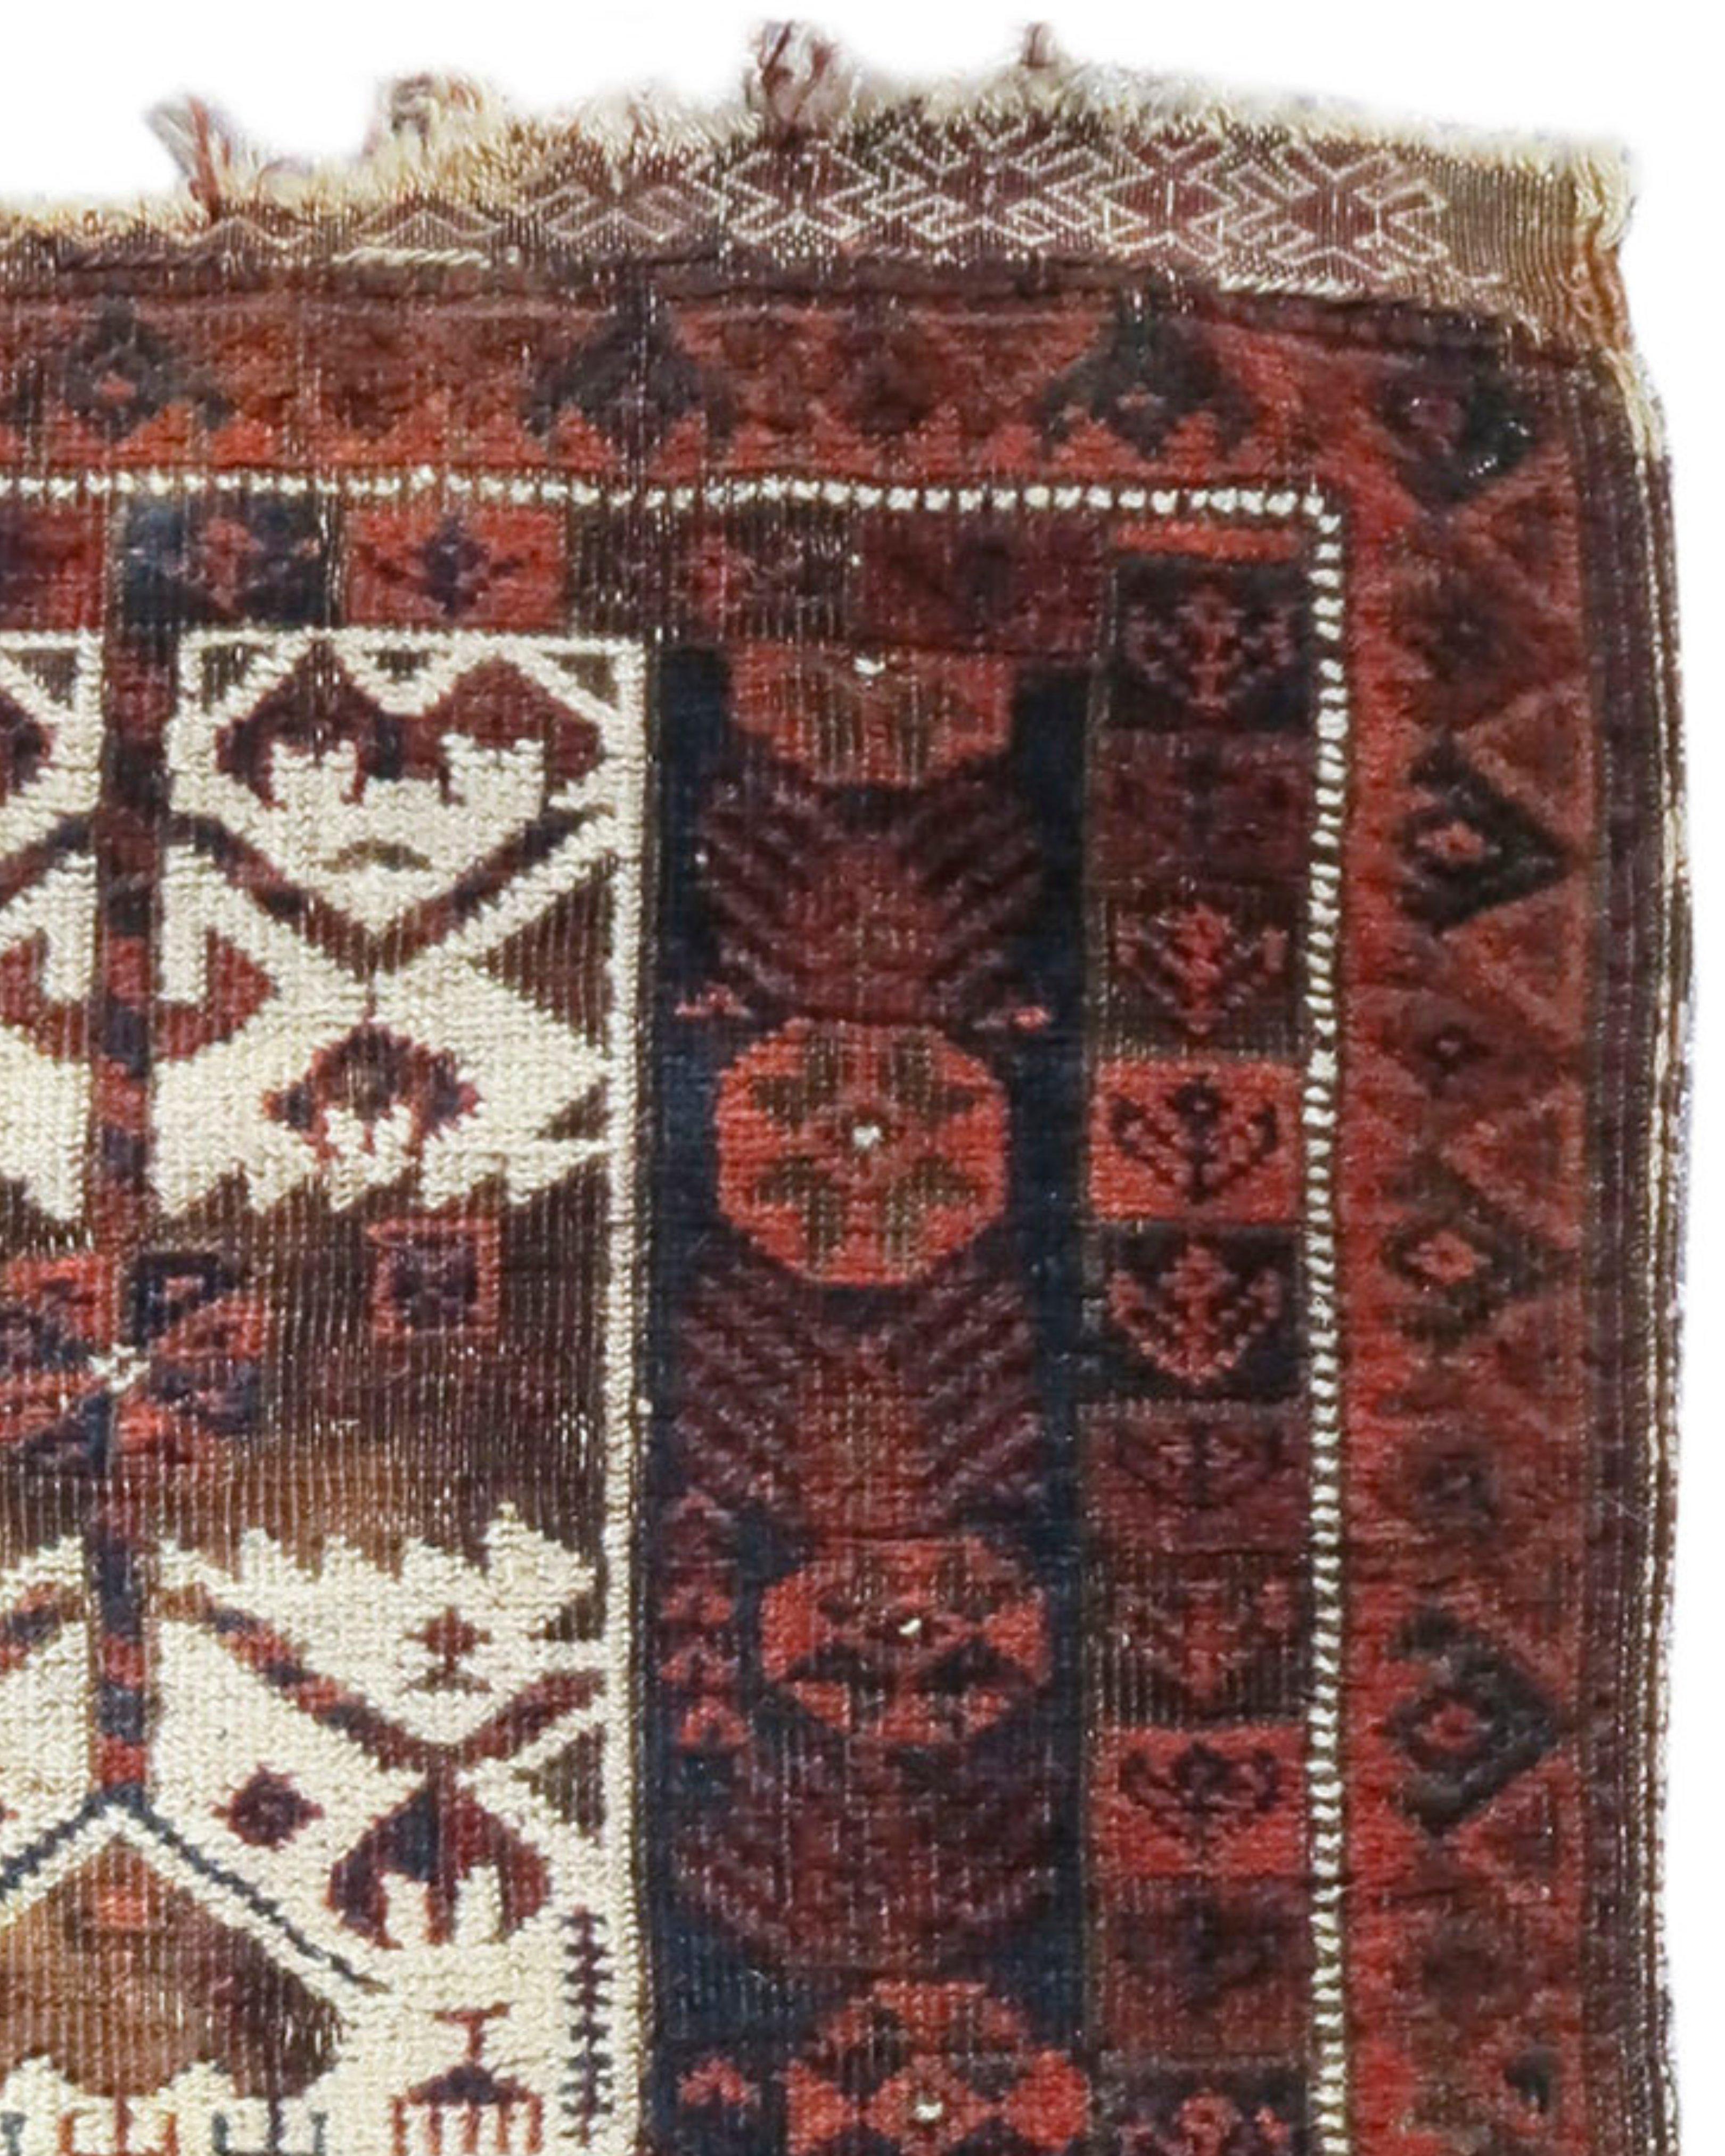 Baluch Balisht Rug, 19th Century

Additional Information:
Dimensions: 1'10